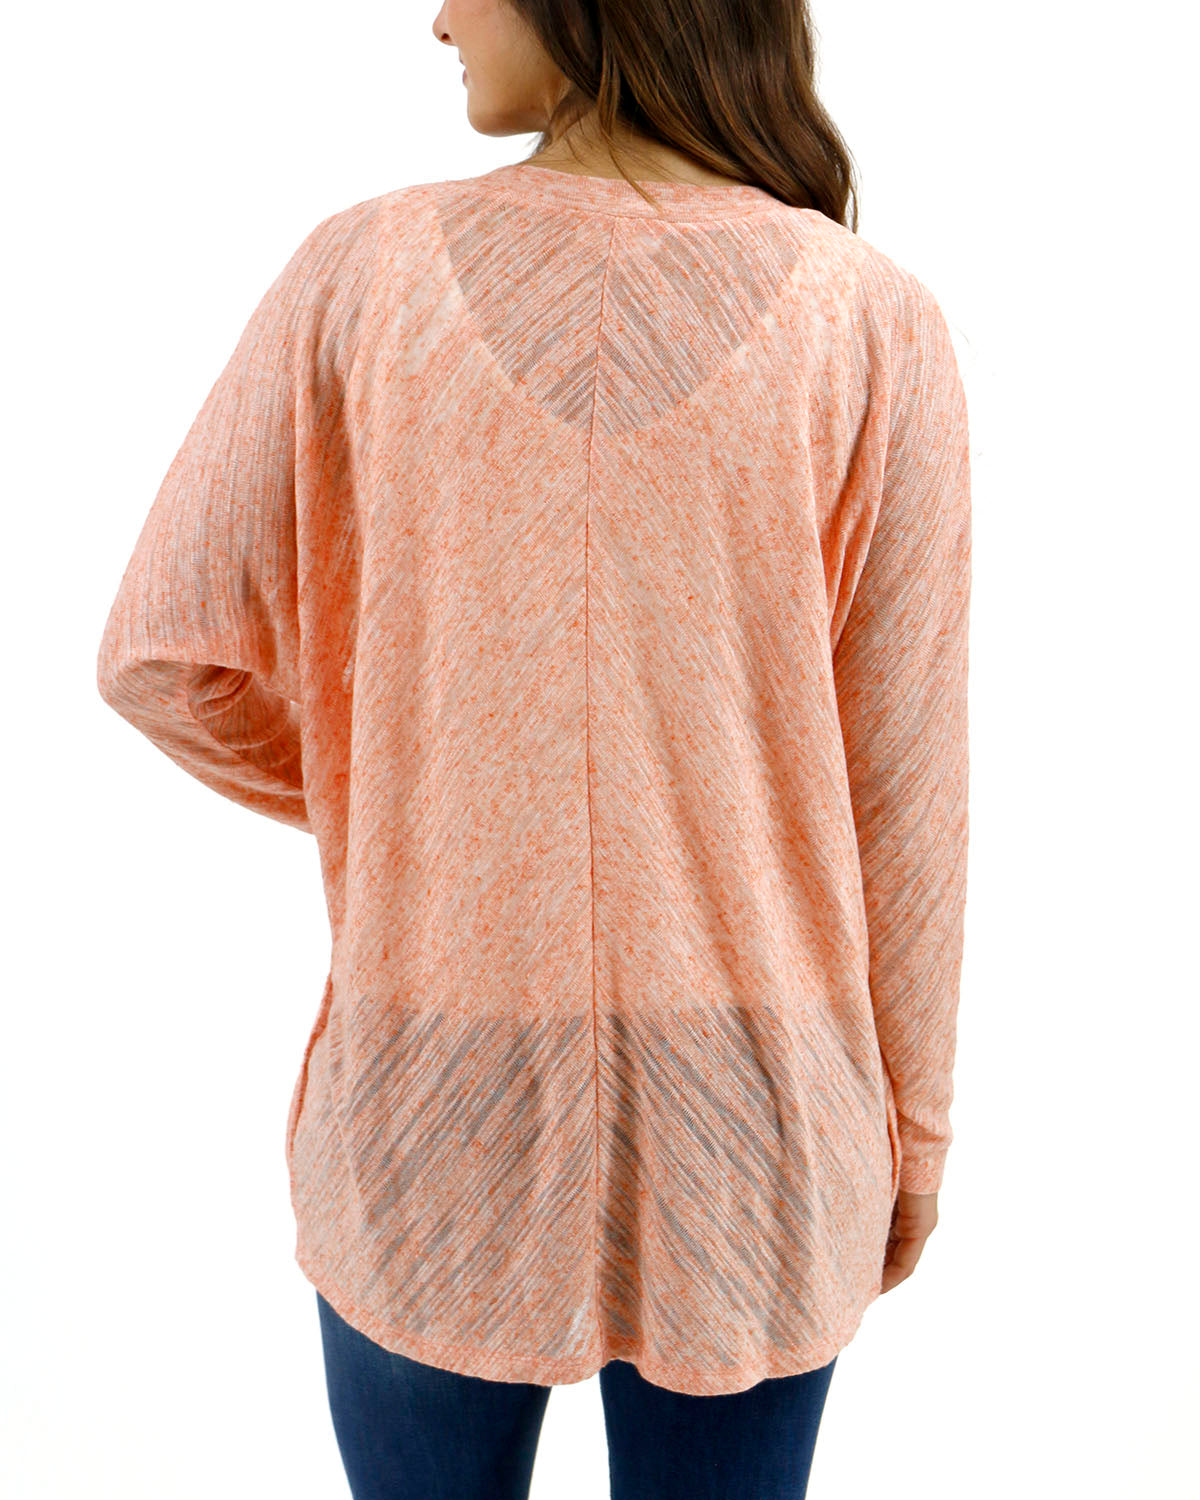 Airy Cocoon Slub Cardigan in and - Dreamsicle Lace FINAL Grace - SALE